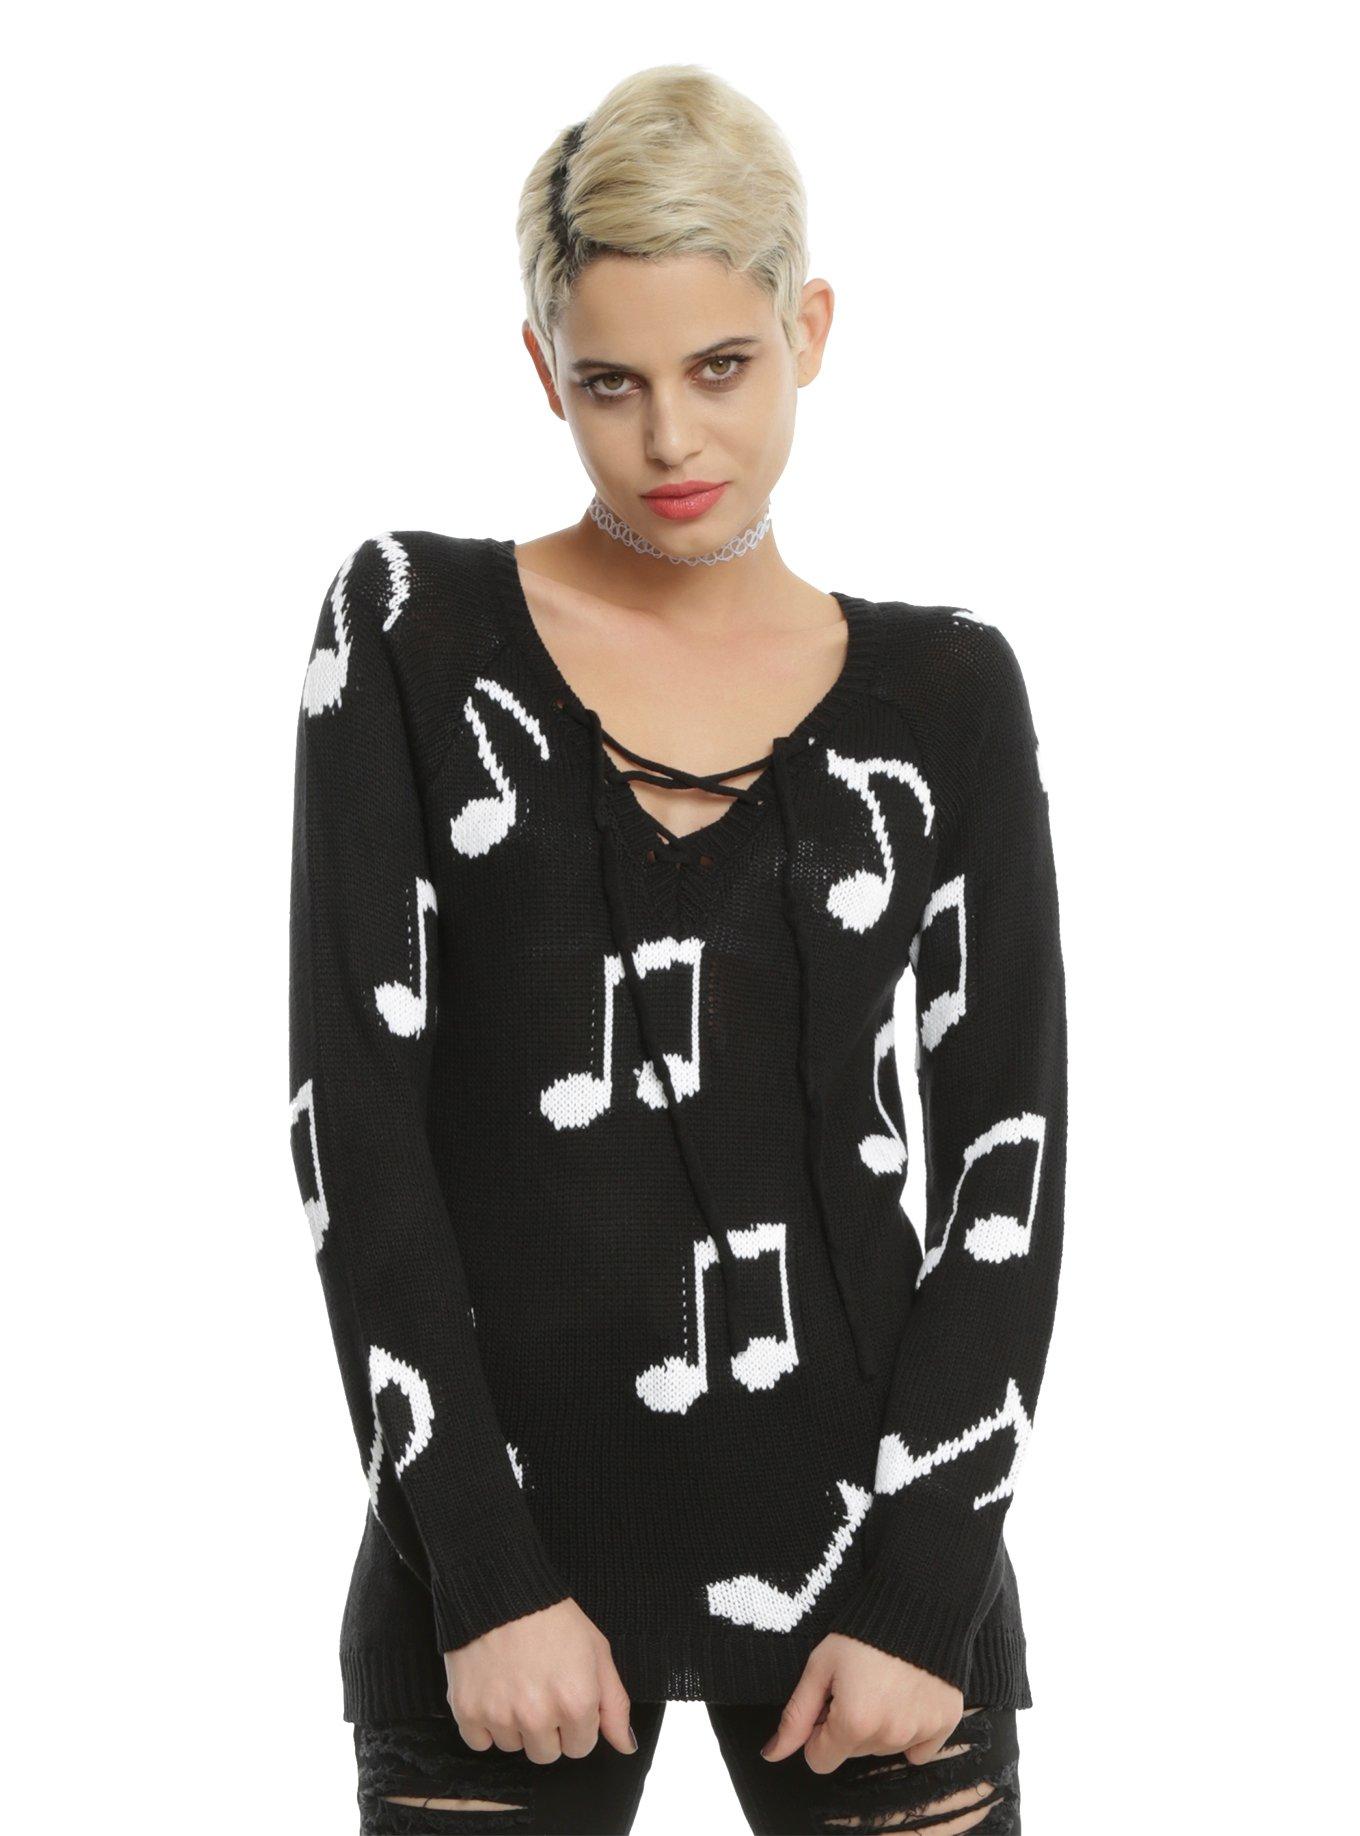 Black & White Music Note Lace-Up Girls Sweater, BLACK, hi-res